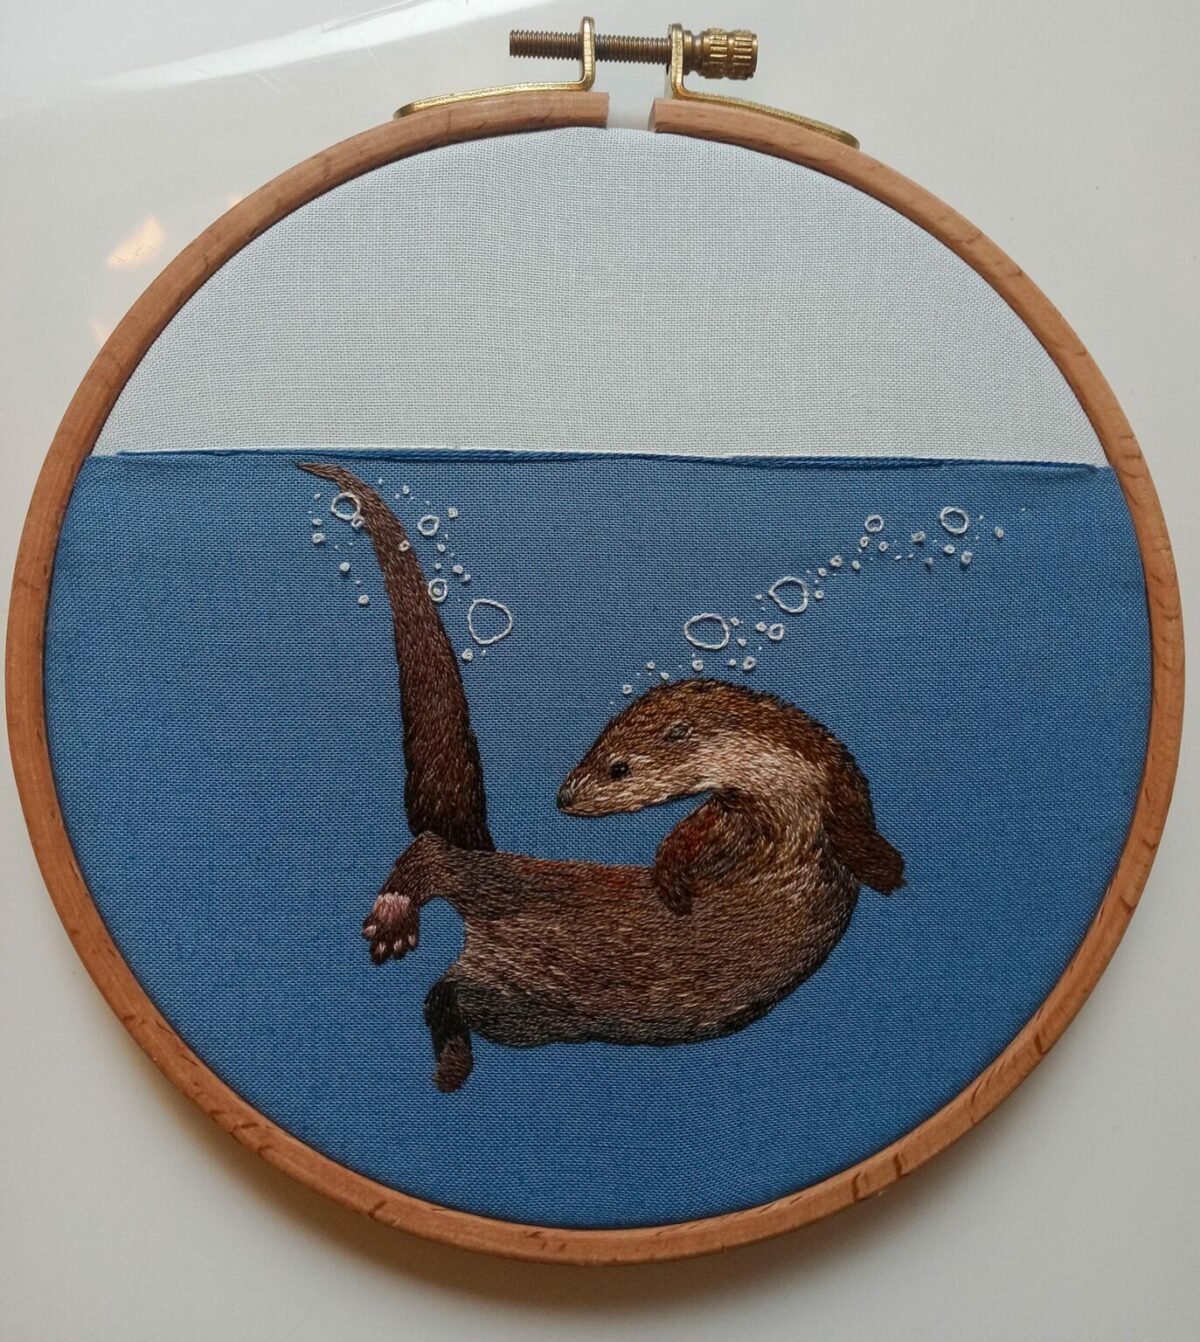 Gorgeous Embroideries Of Animals Plunging Into The Waters By Megan Zaniewski 11